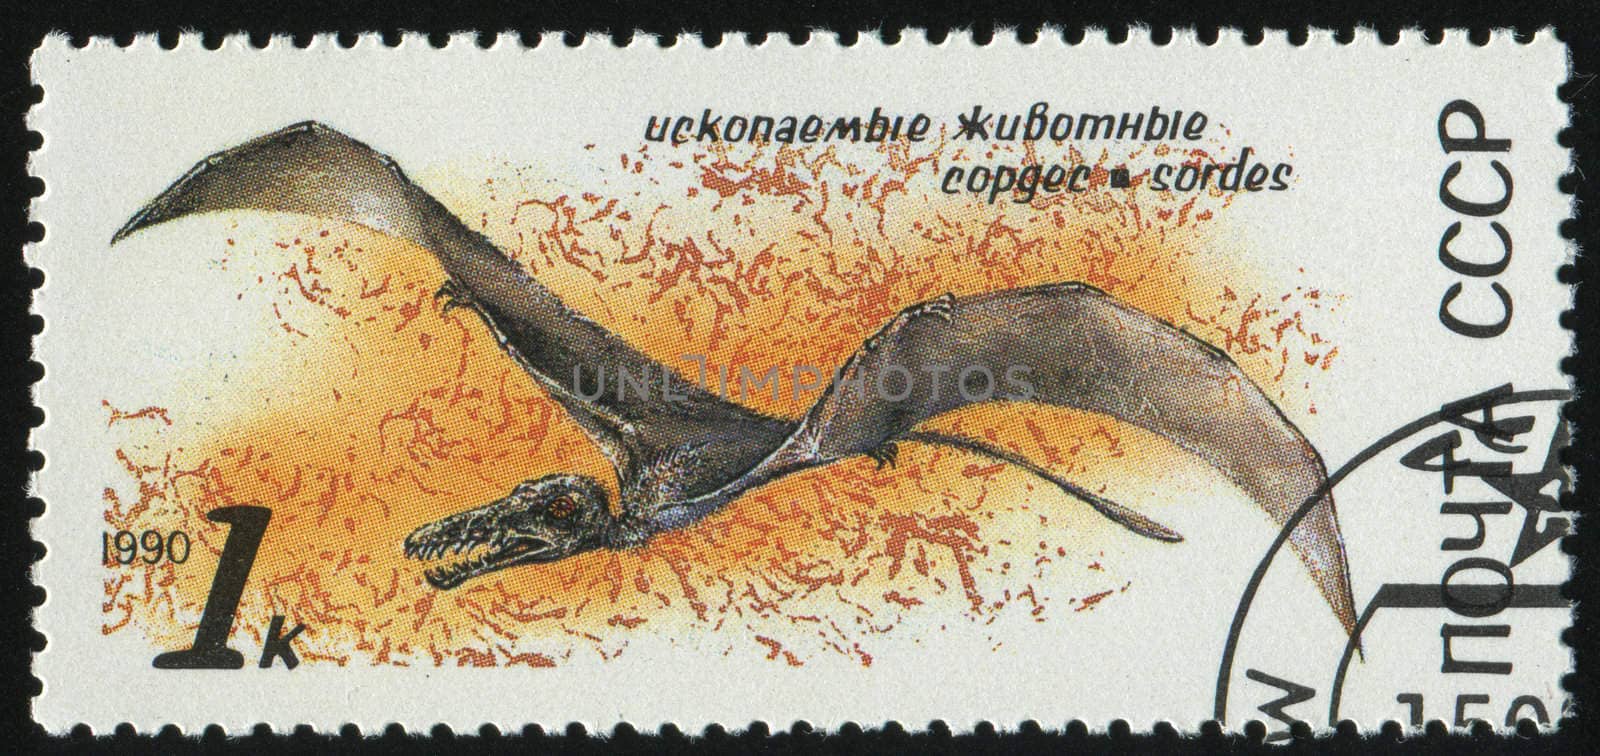 RUSSIA - CIRCA 1990: stamp printed by Russia, shows  Prehistoric Animals, Sordes, circa 1990.